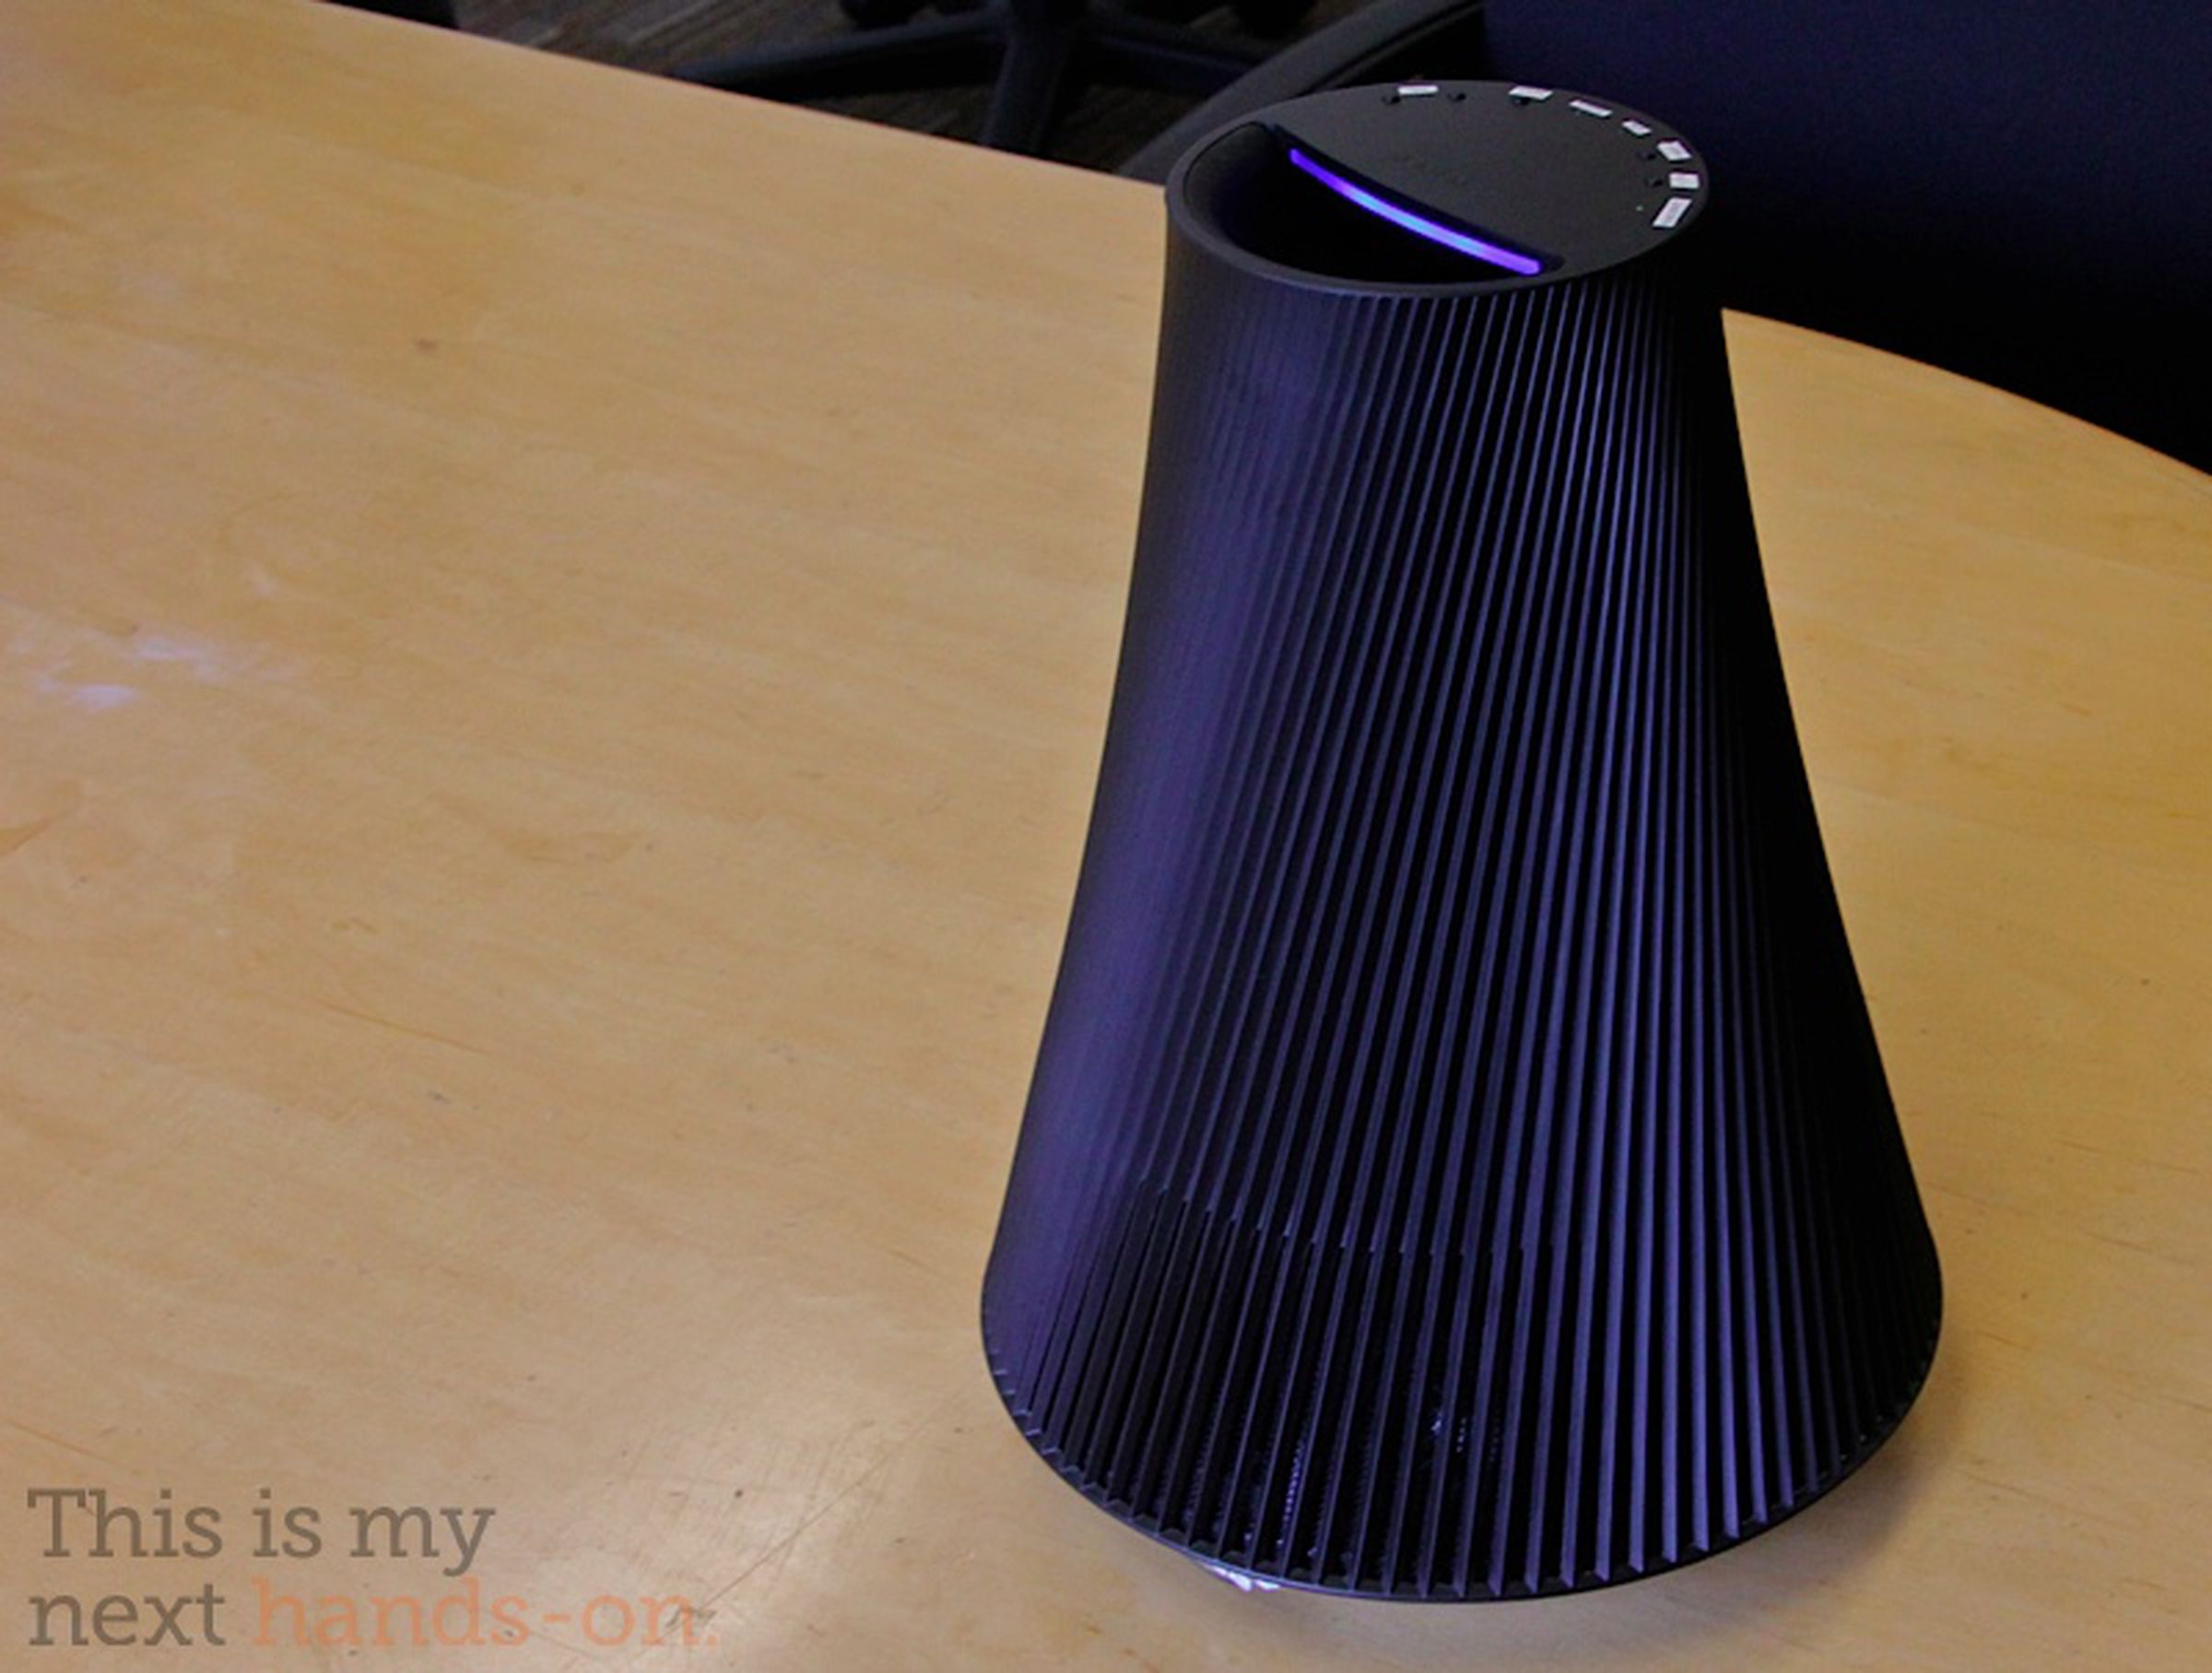 Sony SA-NS500 Portable HomeShare Speaker: wireless AirPlay with a five-hour battery